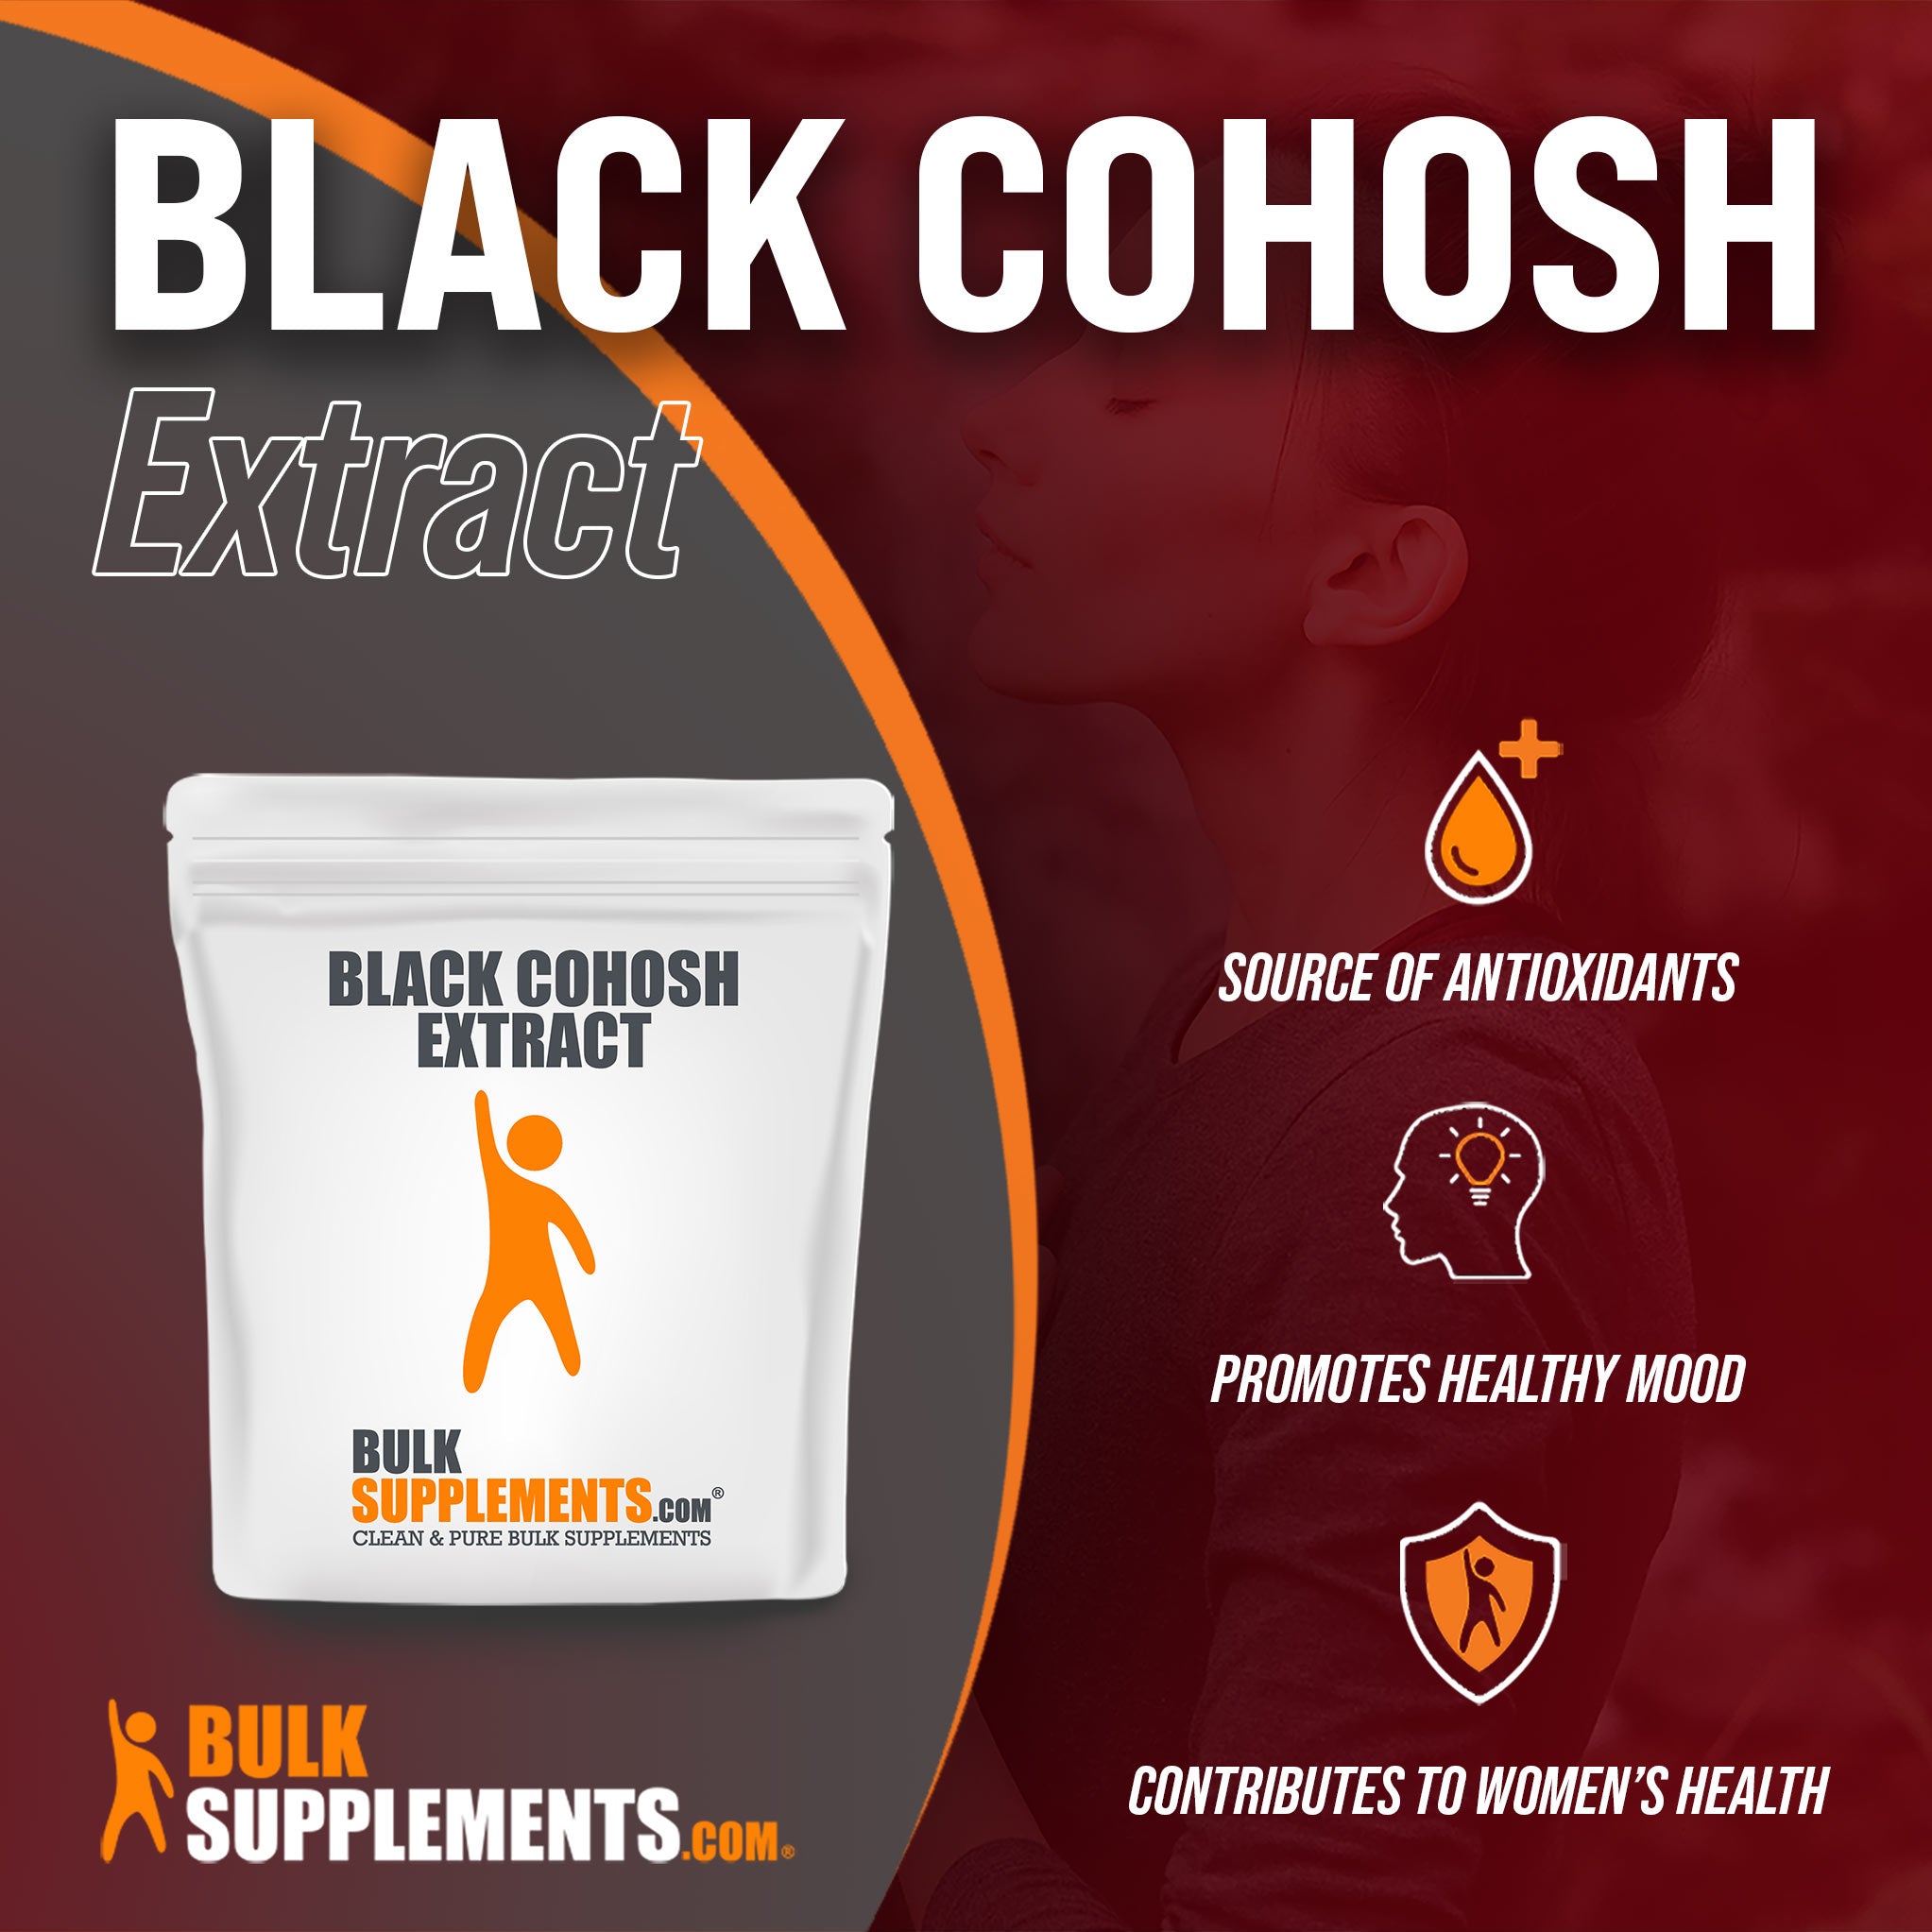 Benefits of Black Cohosh Extract; source of antioxidants, promotes healthy mood, contributes to women's health